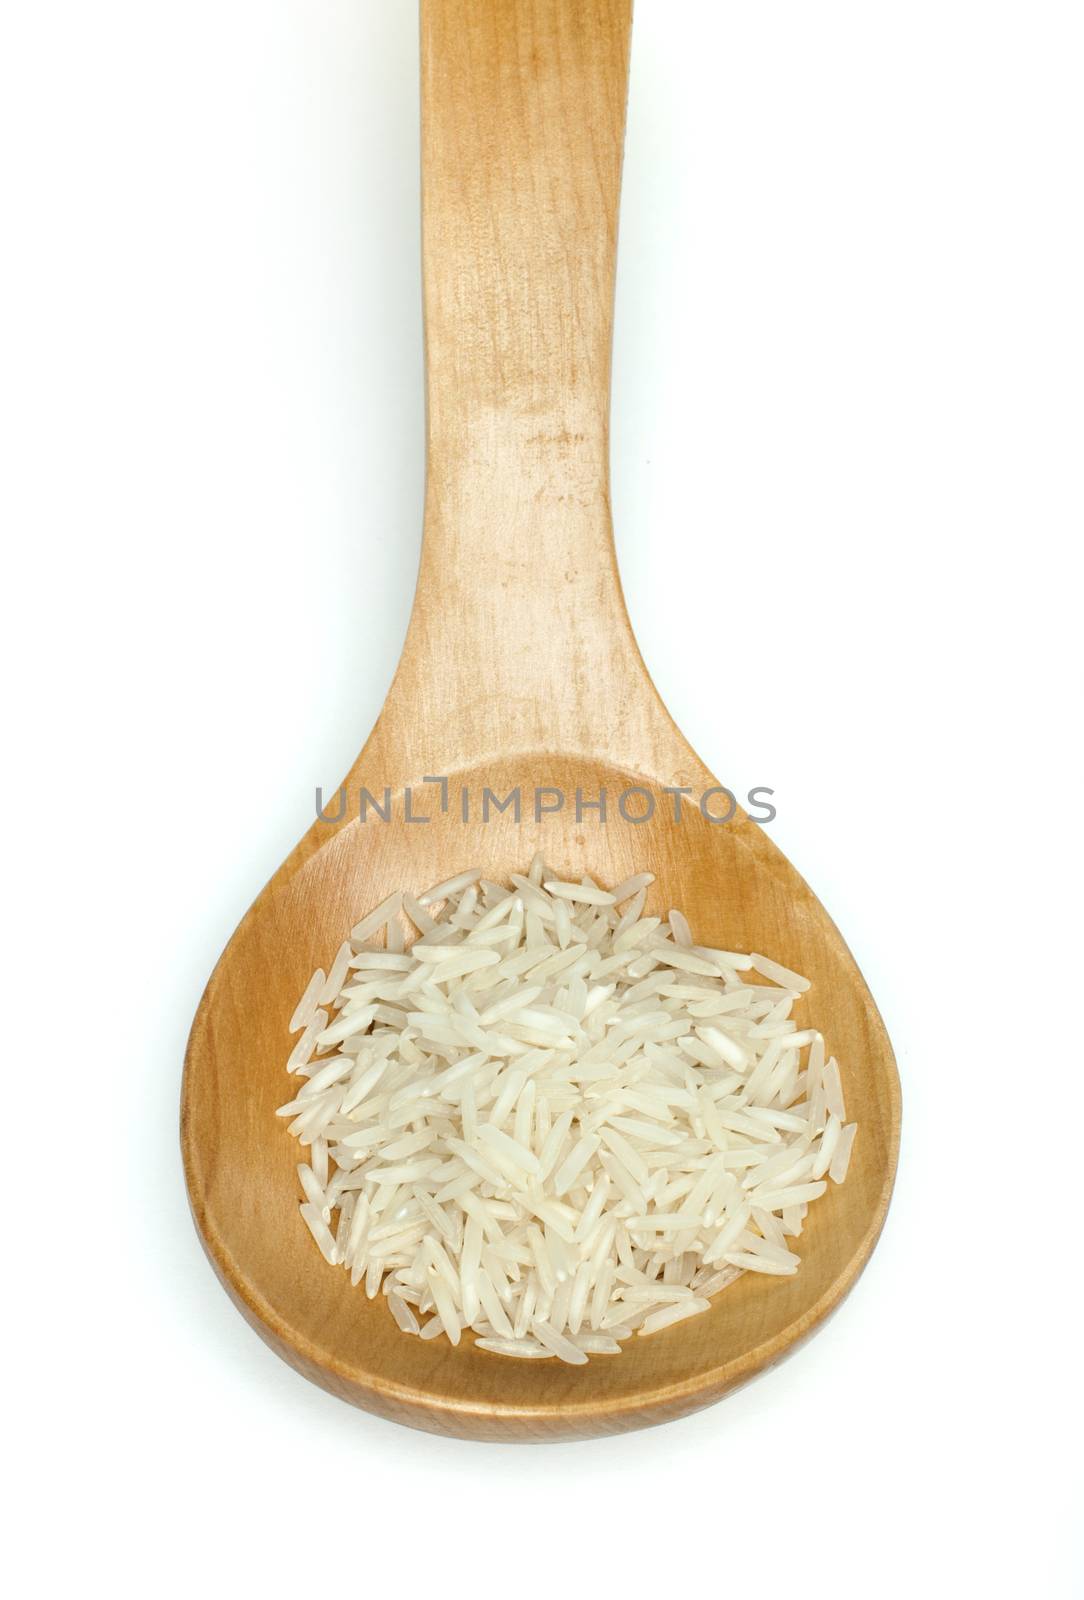 Basmati rice in wooden spoon on white background